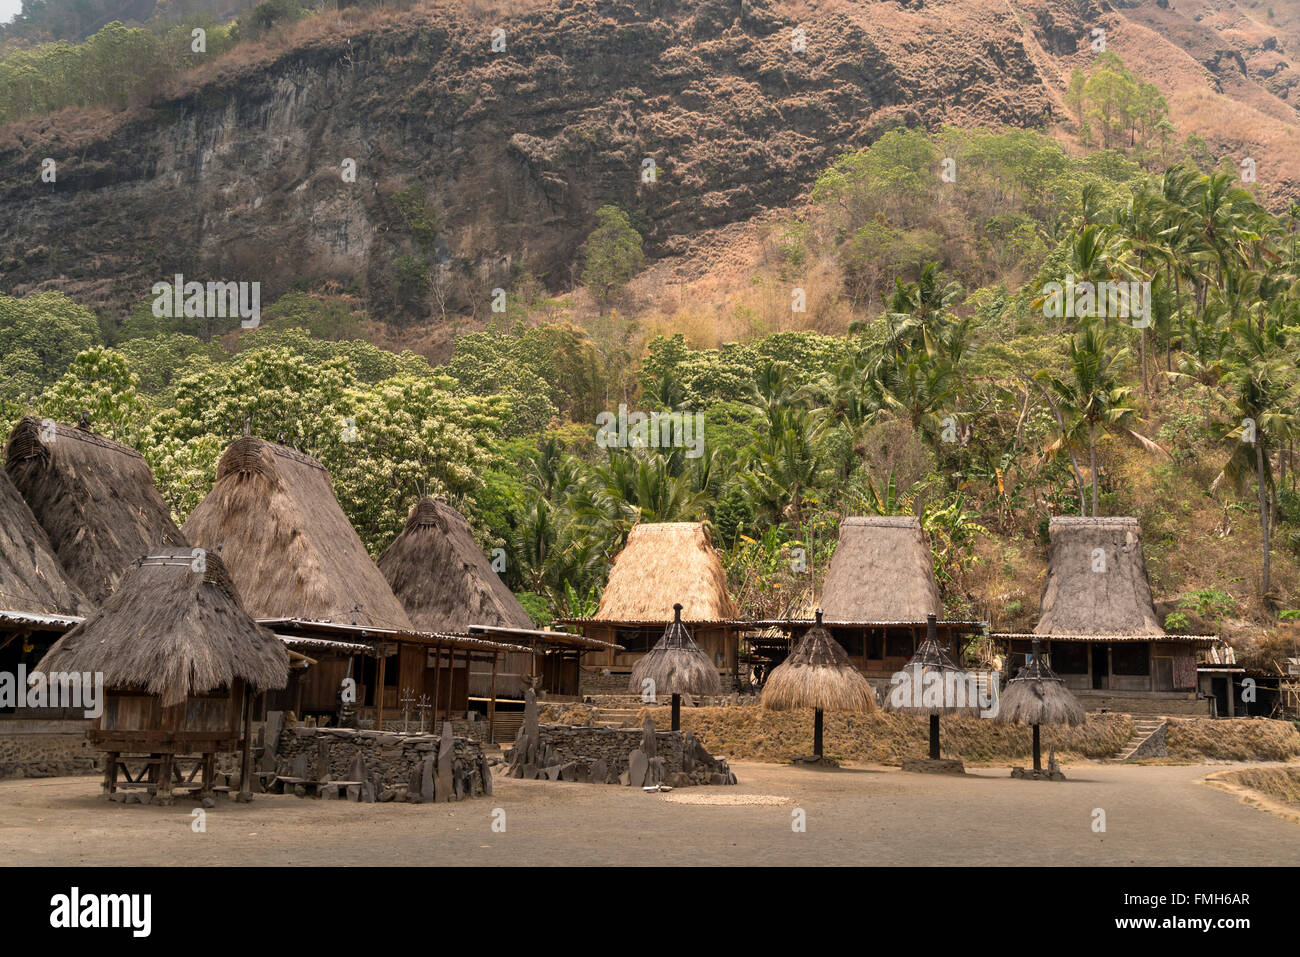 traditional high thatch-roofed houses and shrines in the Ngada village Bena near Bajawa, Flores, Indonesia, Asia Stock Photo